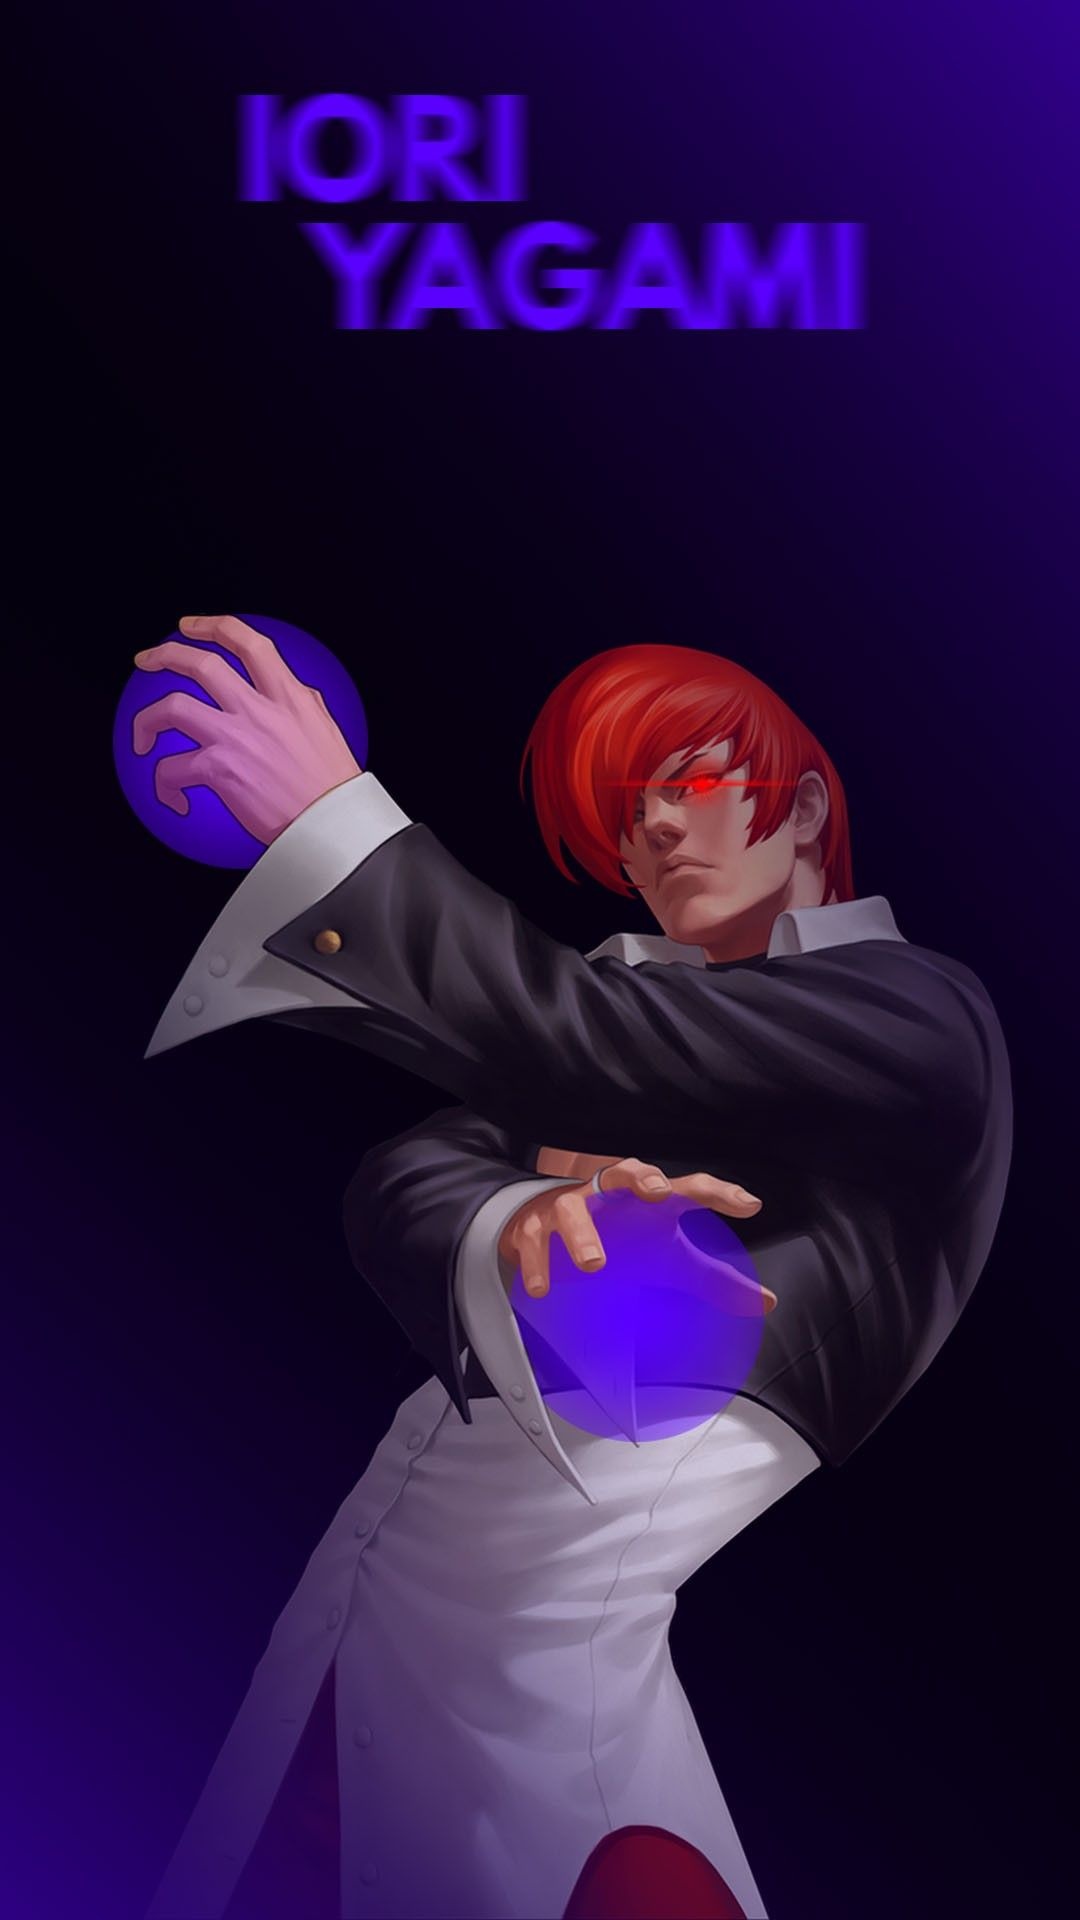 Iori Yagami, Gaming character, Fighter inspiration, Street Fighter, 1080x1920 Full HD Handy